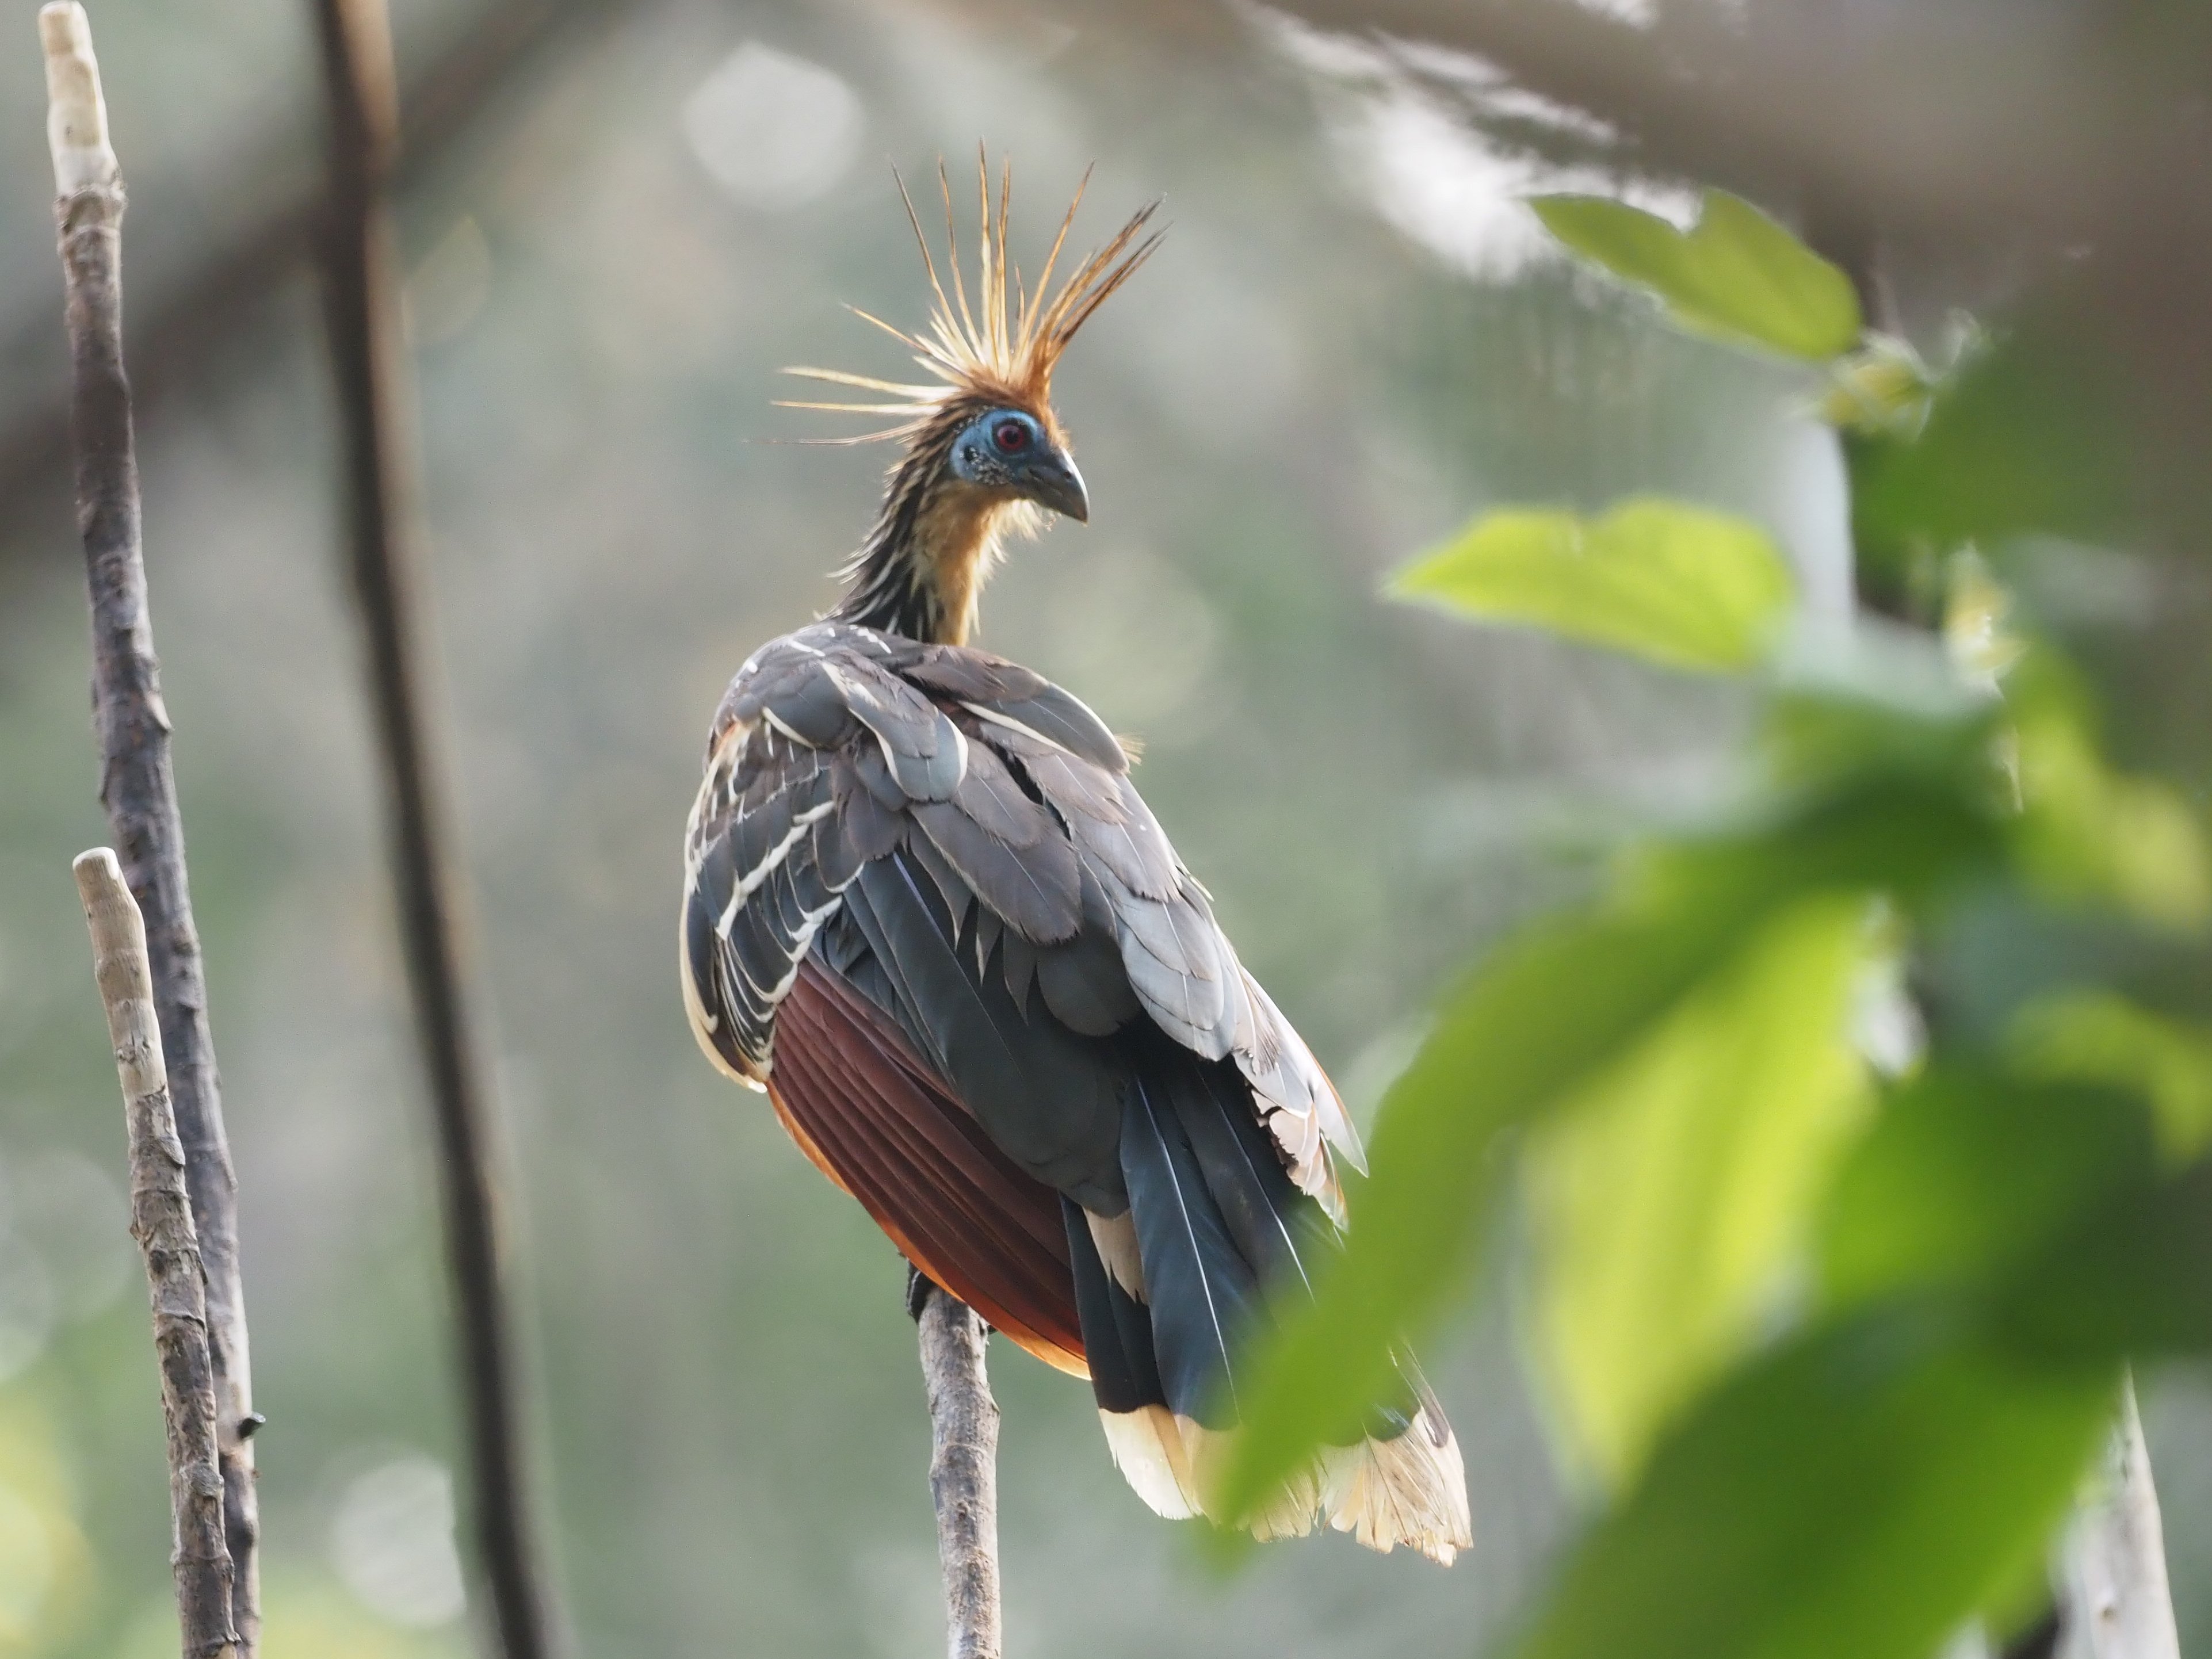 We stand an excellent chance of seeing the extraordinary and almost prehistoric looking Hoatzin © Chris Collins